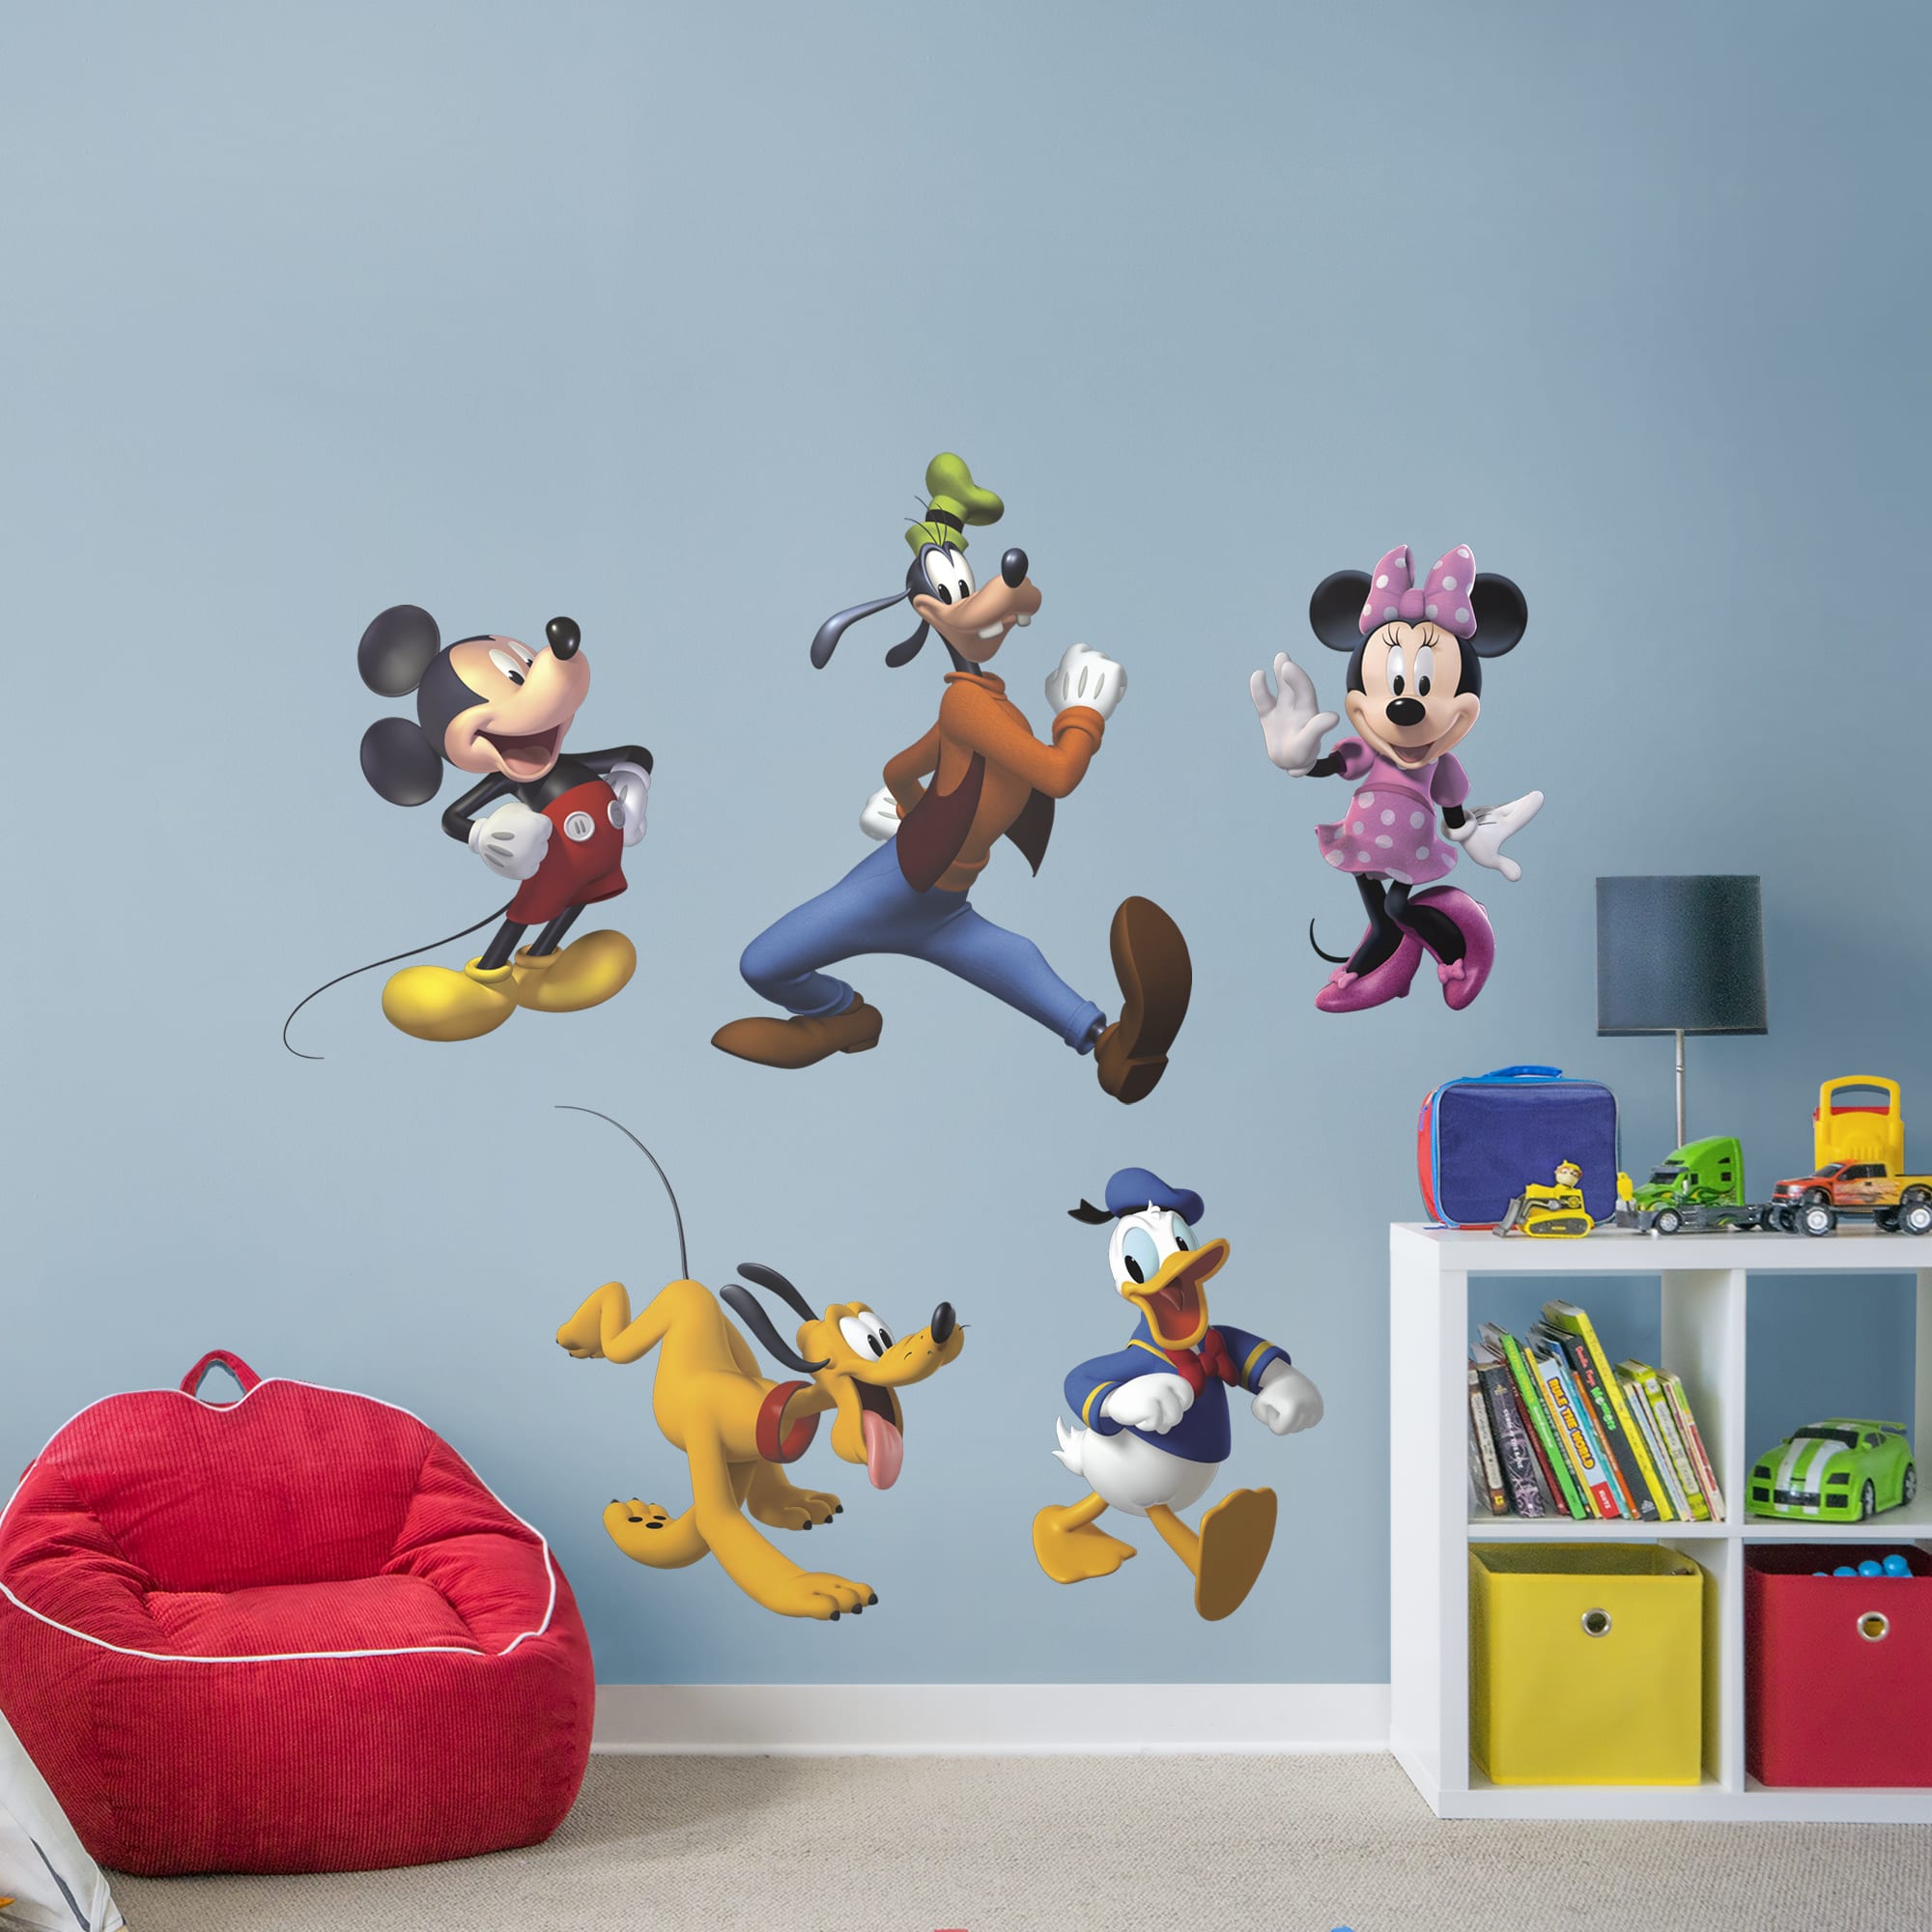 Mickey Mouse and Friends: Collection - Officially Licensed Disney Removable Wall Decals 25.0"W x 30.0"H by Fathead | Vinyl